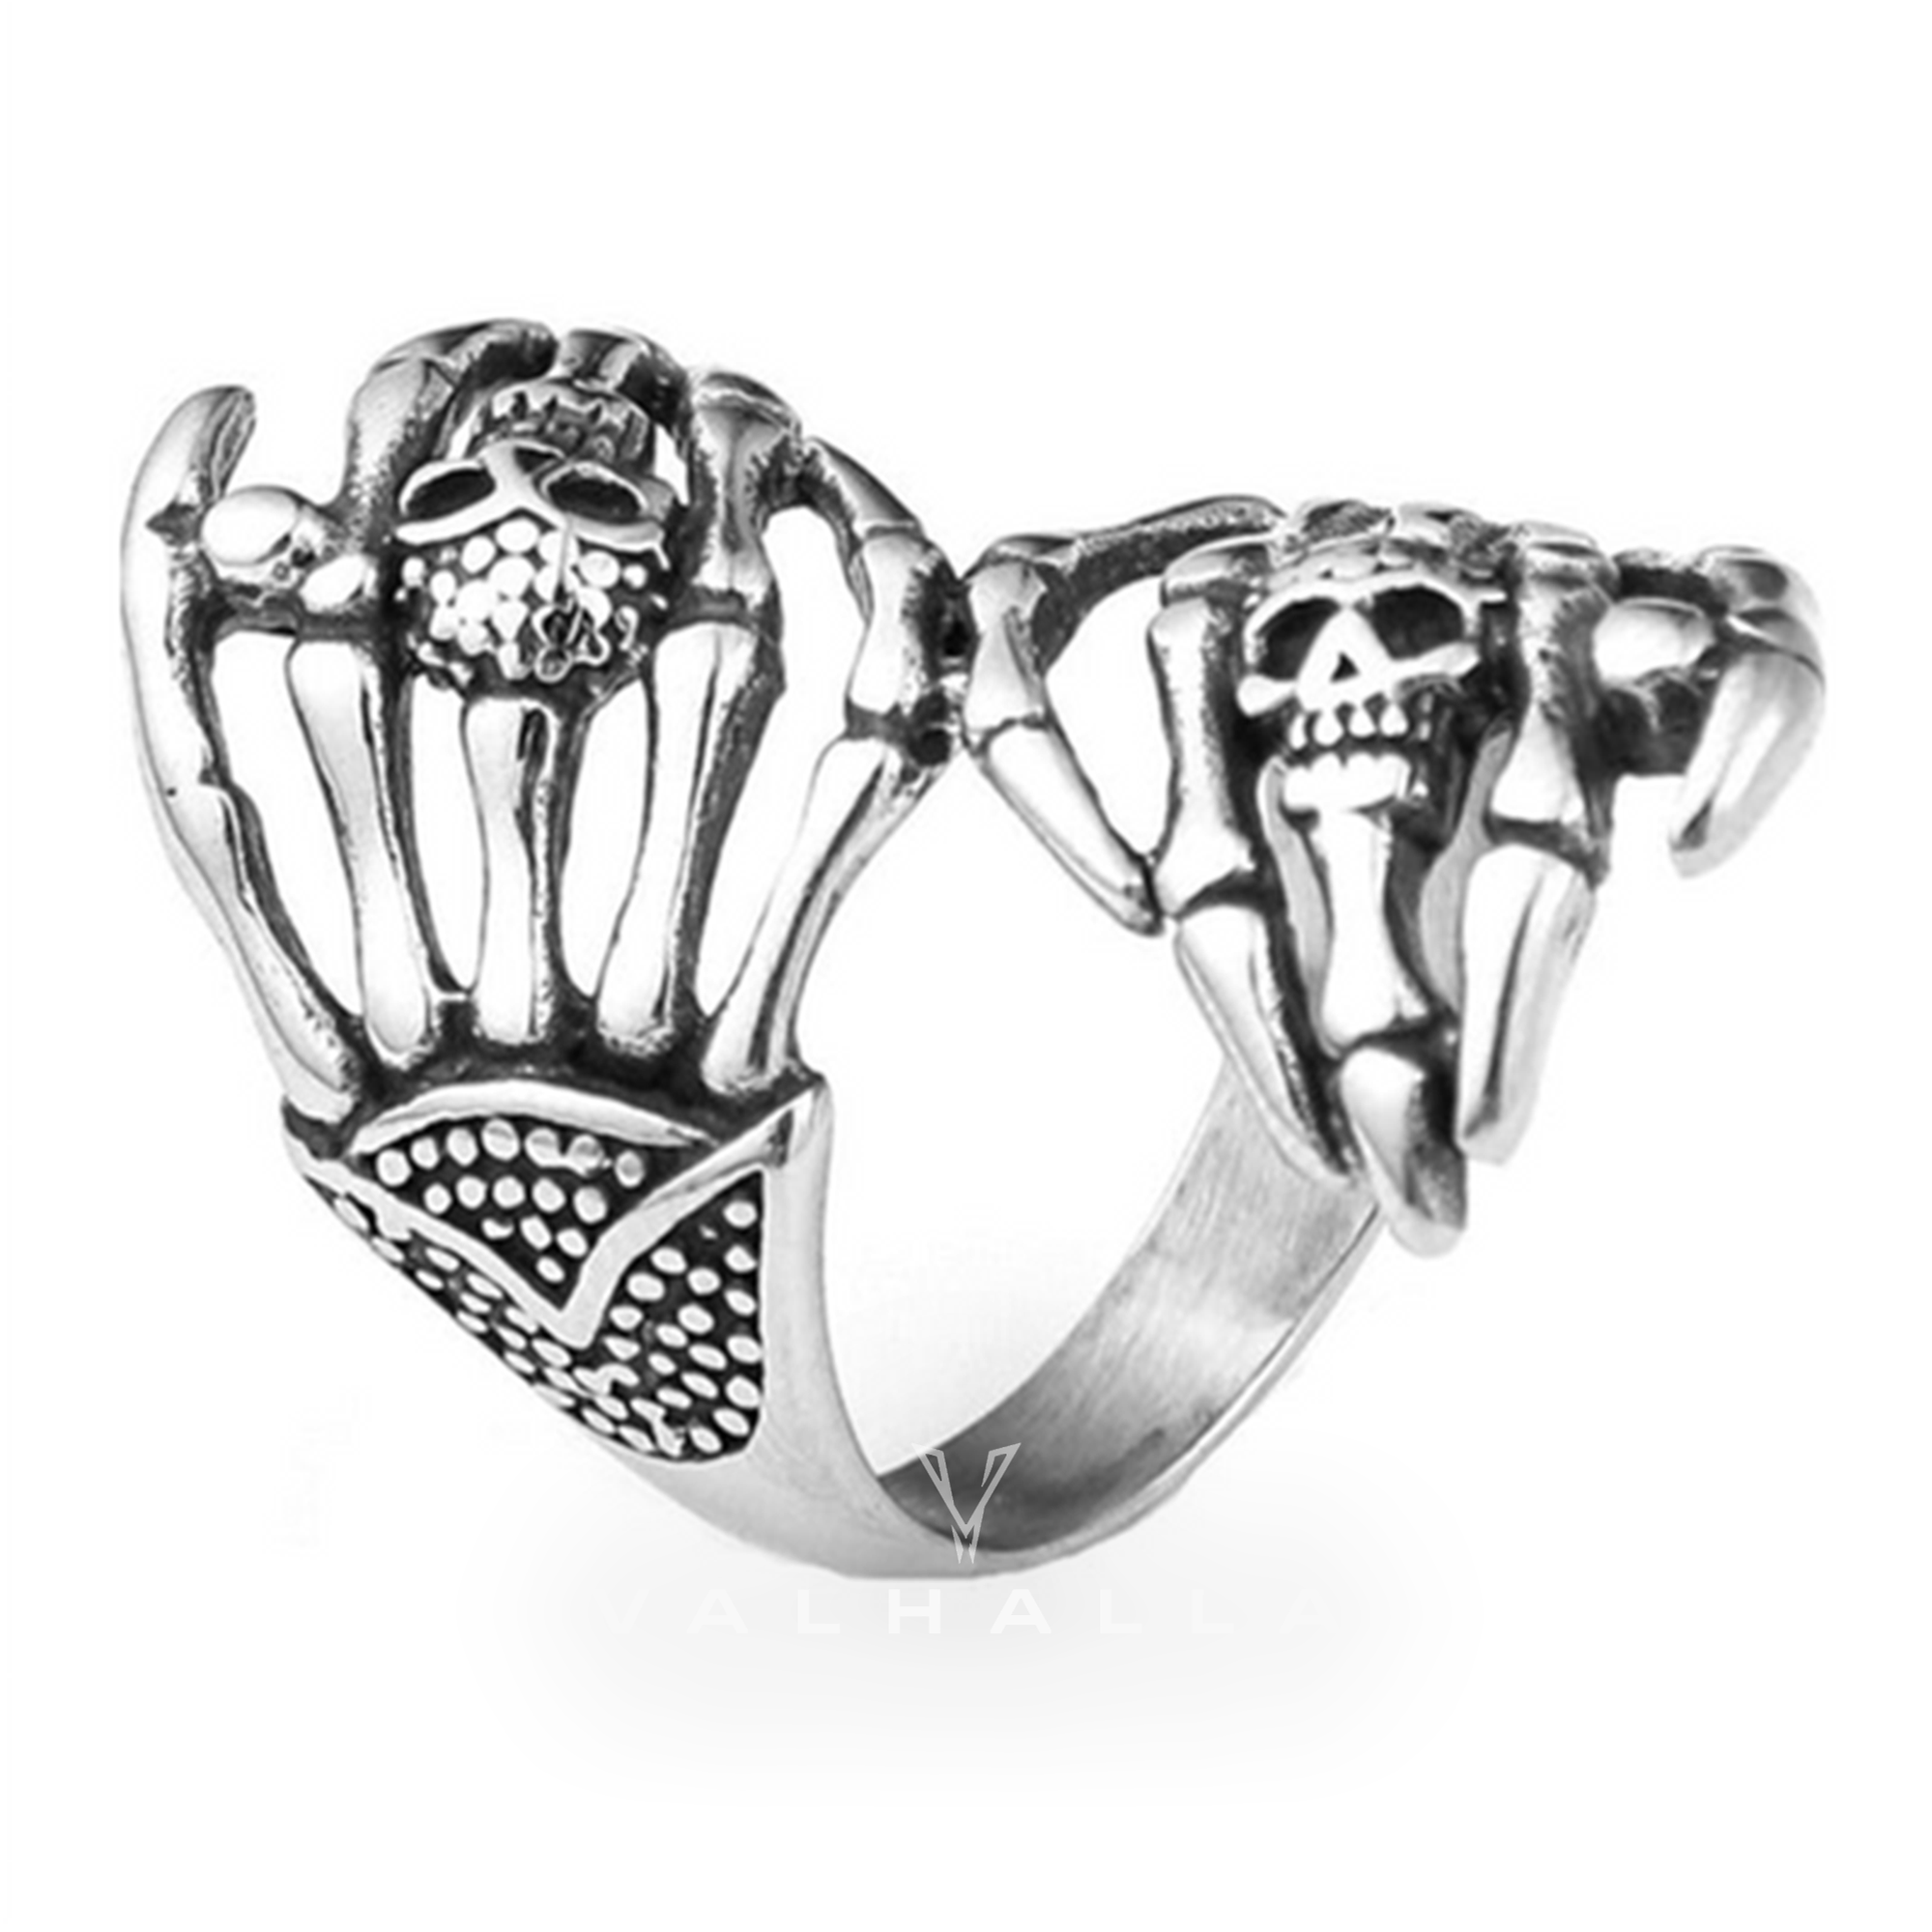 Double Ghost Hand Stainless Steel Skull Ring